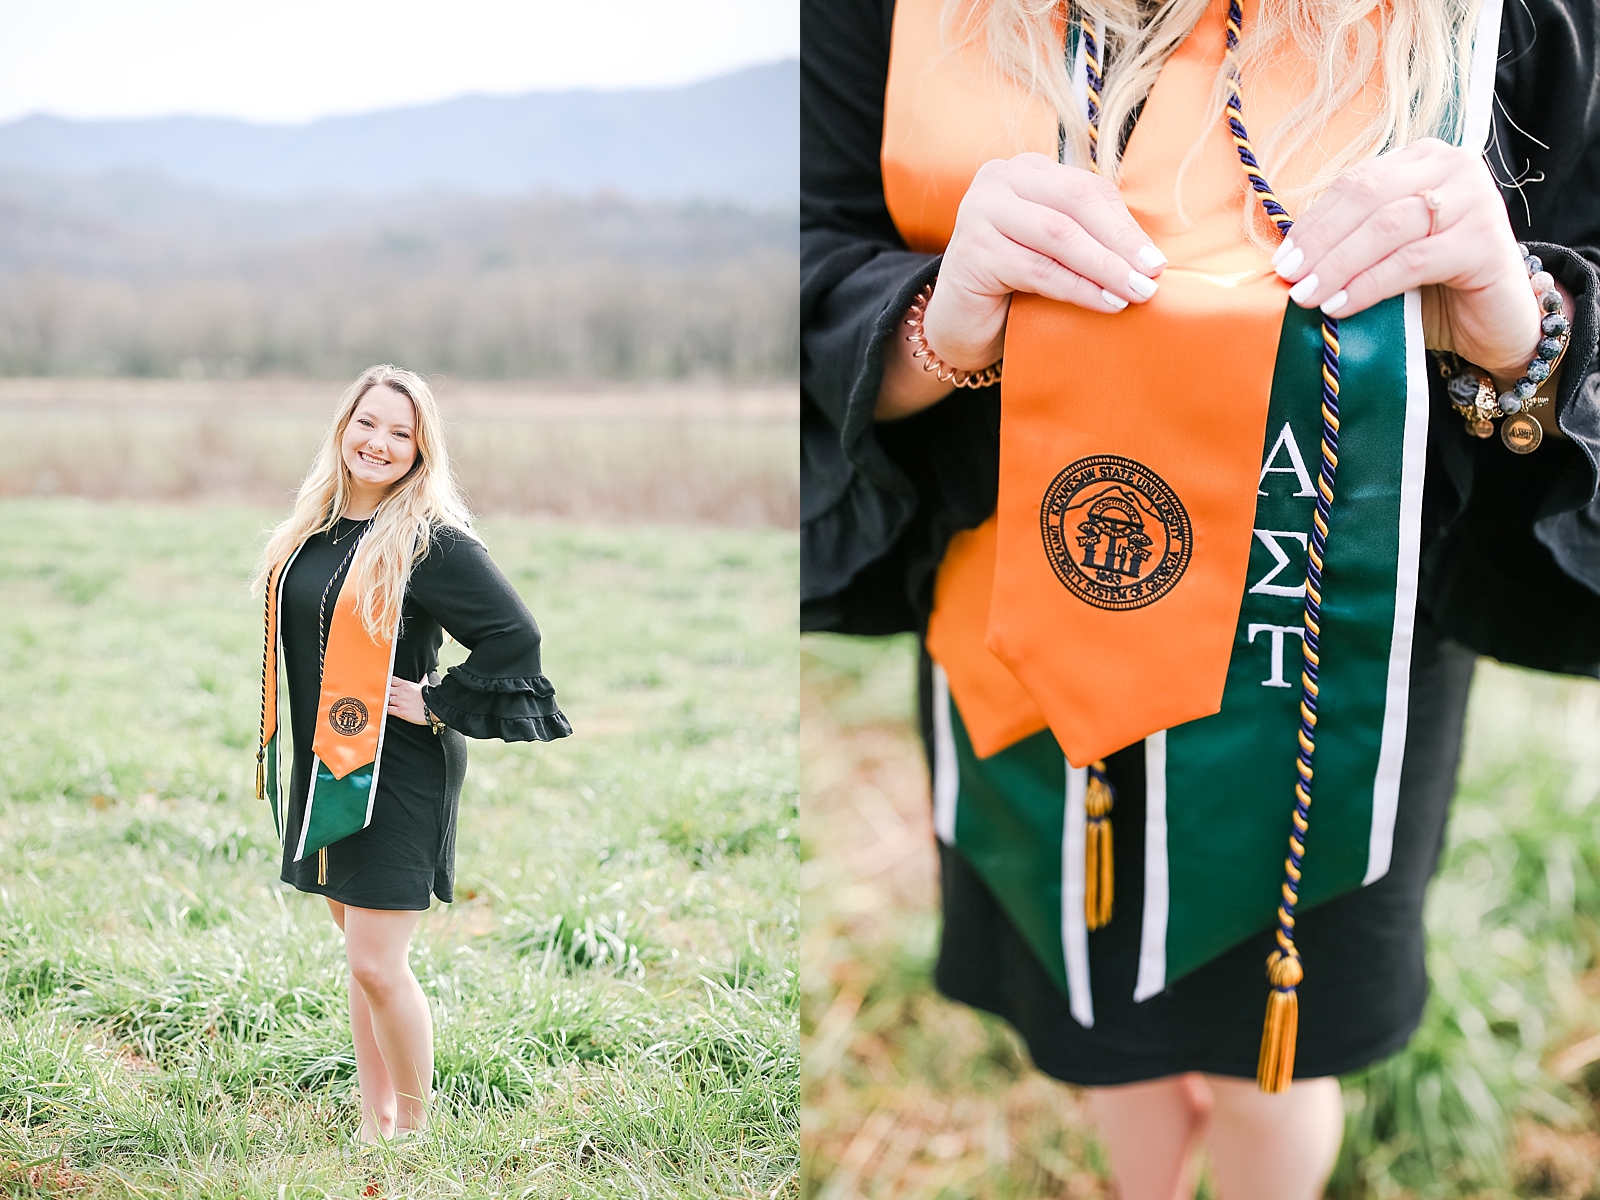 Kennesaw State University Senior Session Rachel smiling at the camera in field and detail of sashes photos 